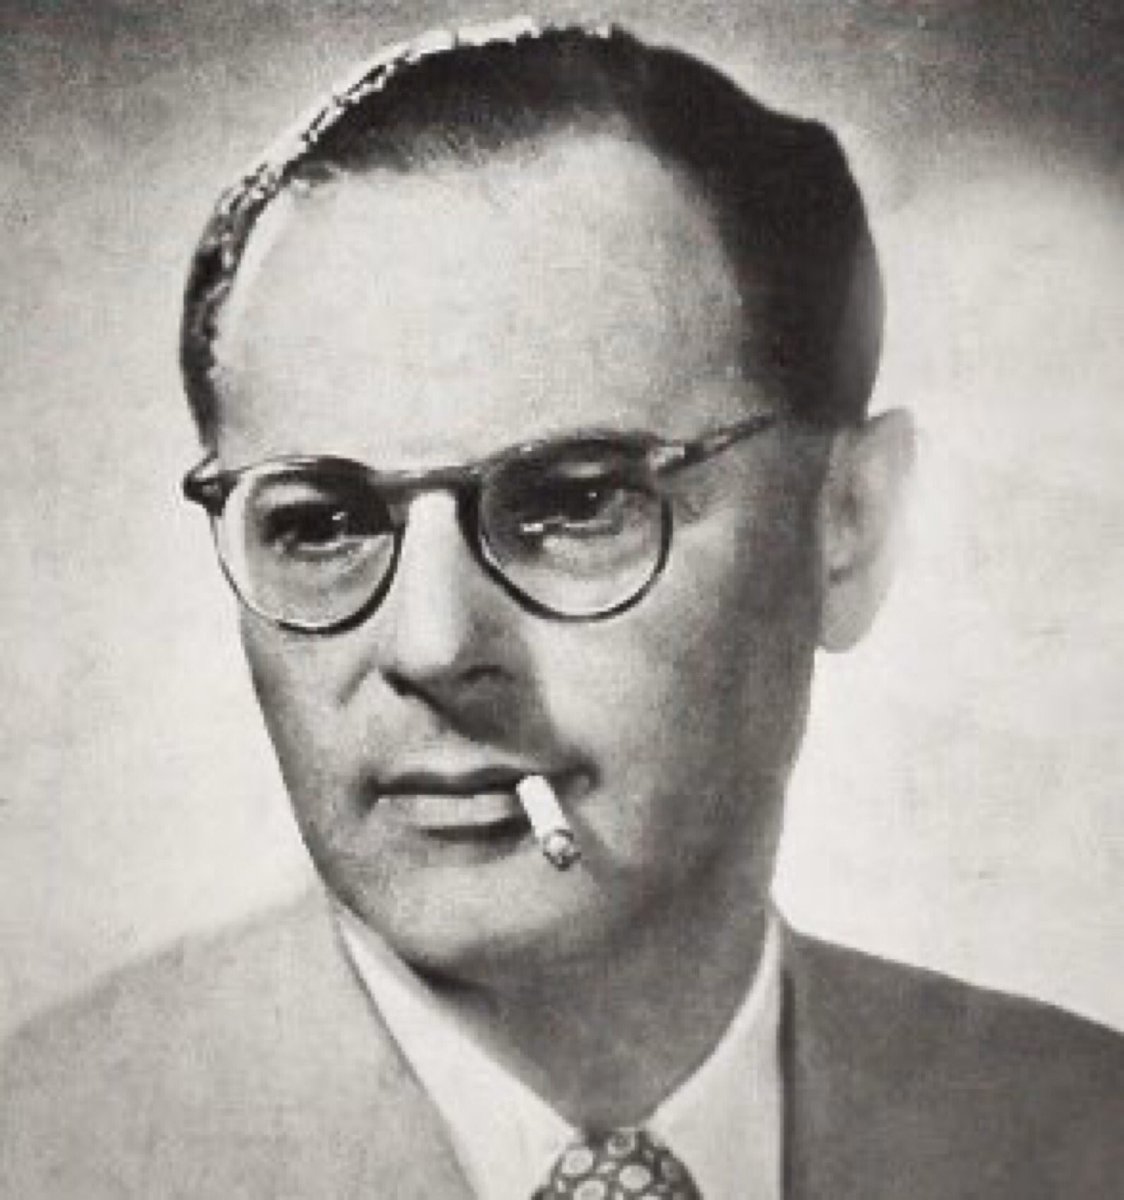 The NE of NERO came from the name of co-founder Heinrich Nebenzal. His son Seymour (below) ran the company and is credited for making Nero-Film a top production house in Europe. As a Jew, he was forced to shutter Nero in 1933 and fled the country. He landed in Hollywood in 1939.